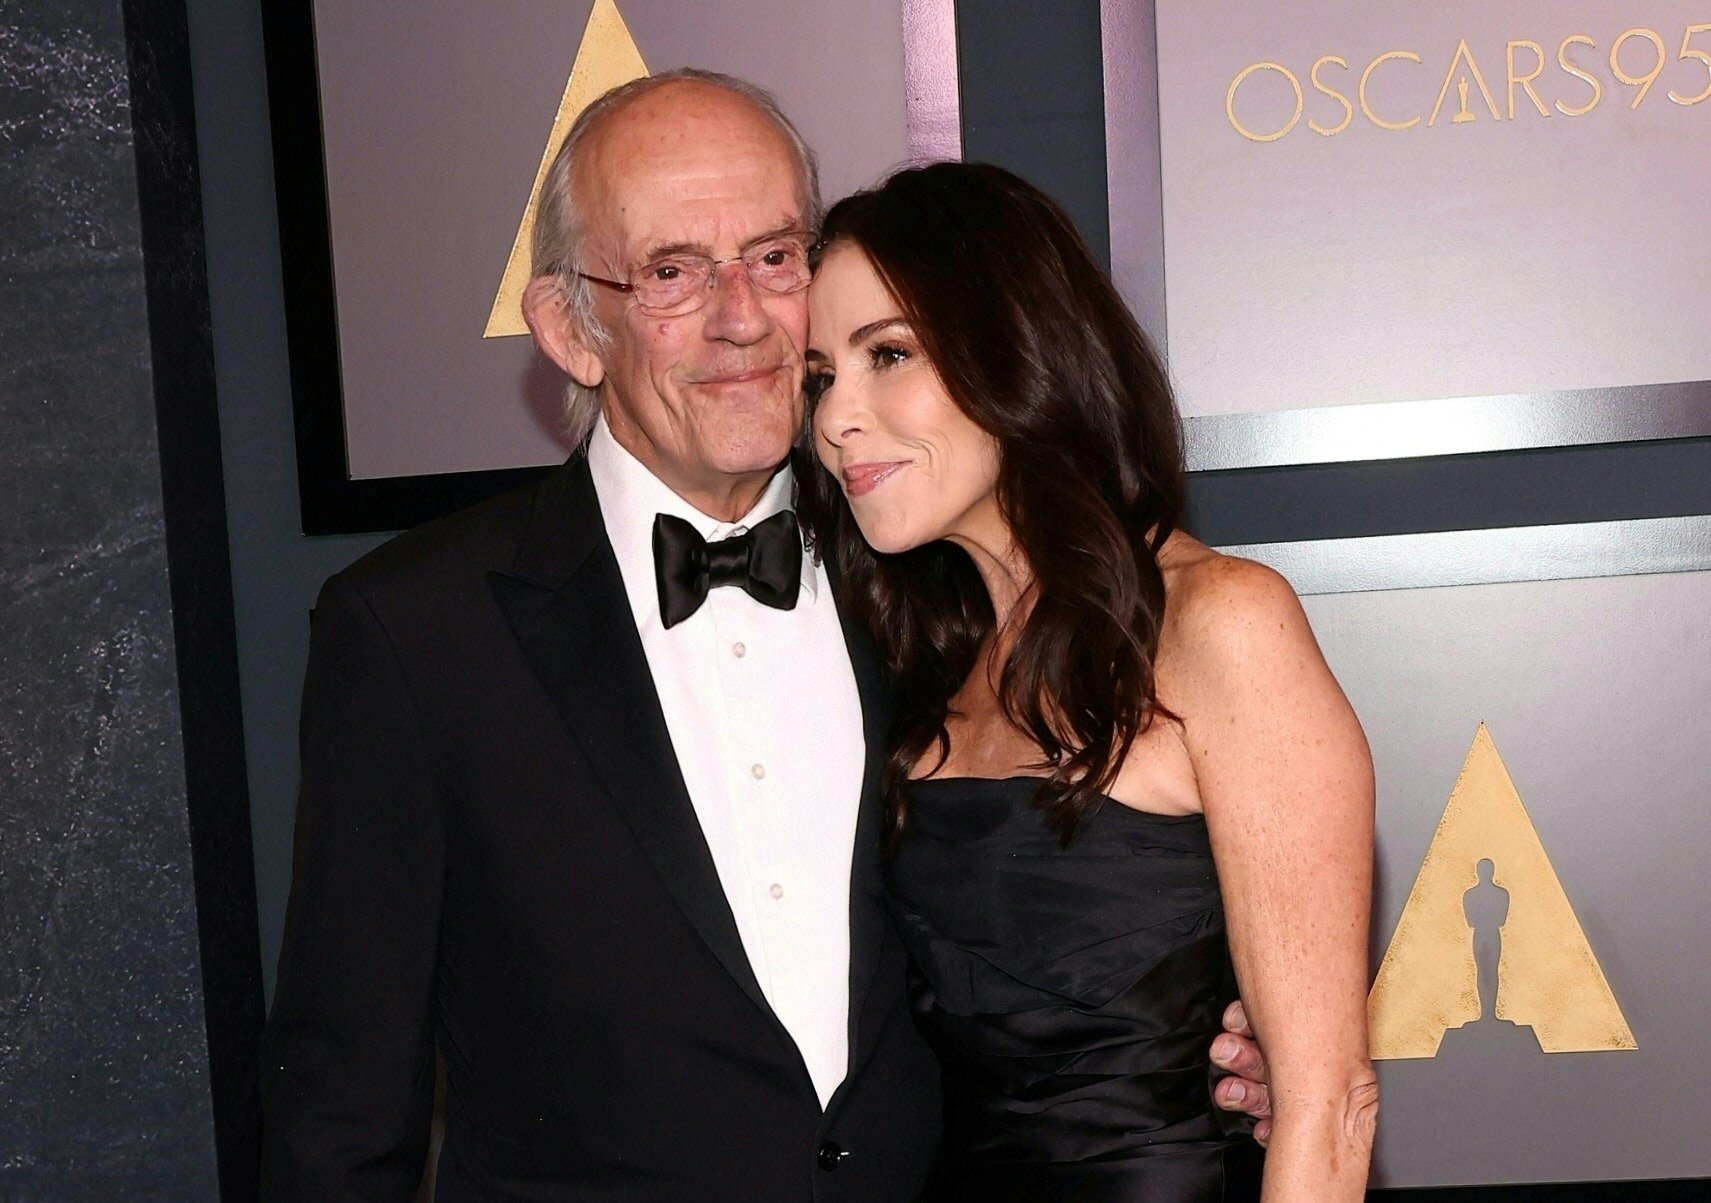 Christopher Lloyd and Lisa Loiacono at the Academy of Motion Picture Arts and Sciences' 13th Annual Governors Awards hosted at the Fairmont Century Plaza, Lo Angeles, CA, on November 19, 2022. | Source: Getty Images 